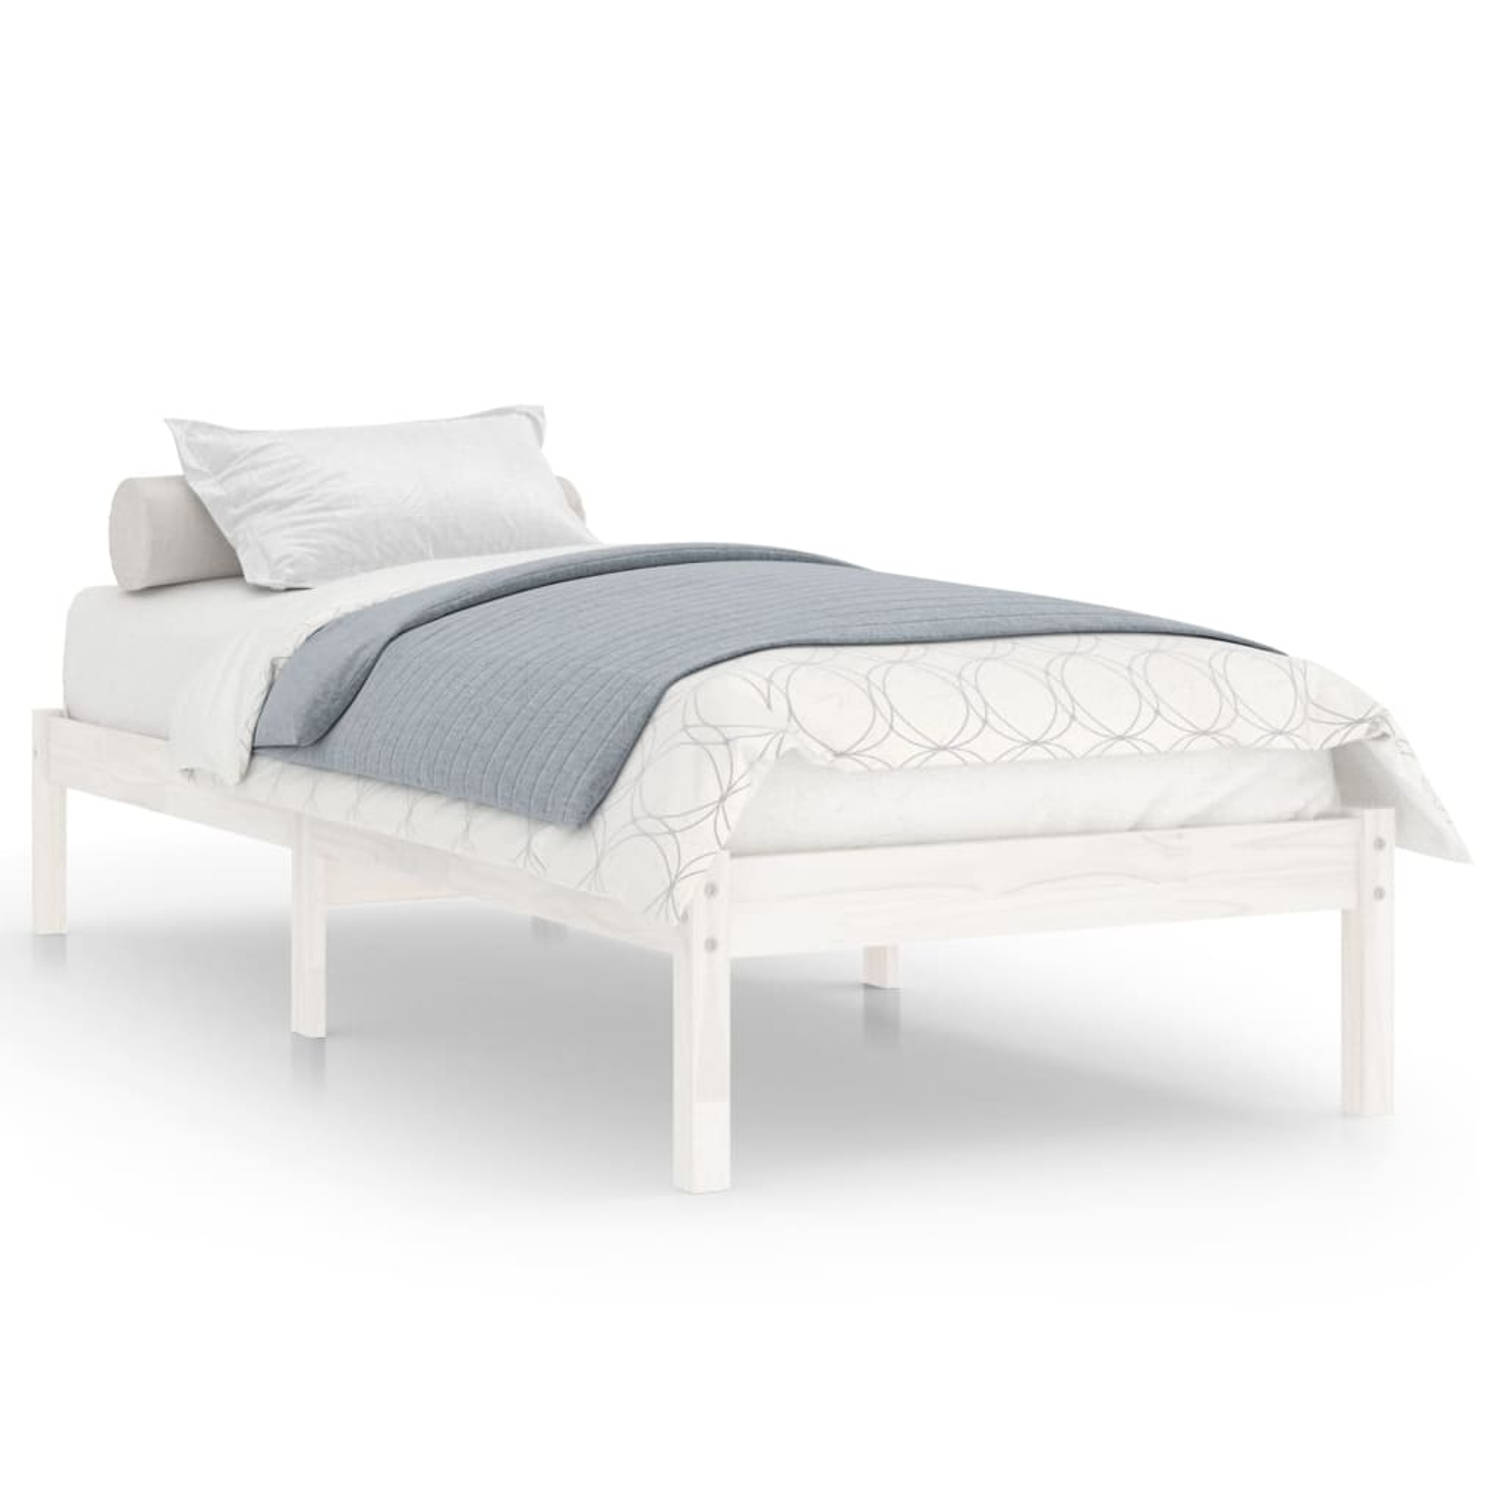 The Living Store Bedframe massief grenenhout wit 90x200 cm - Bed